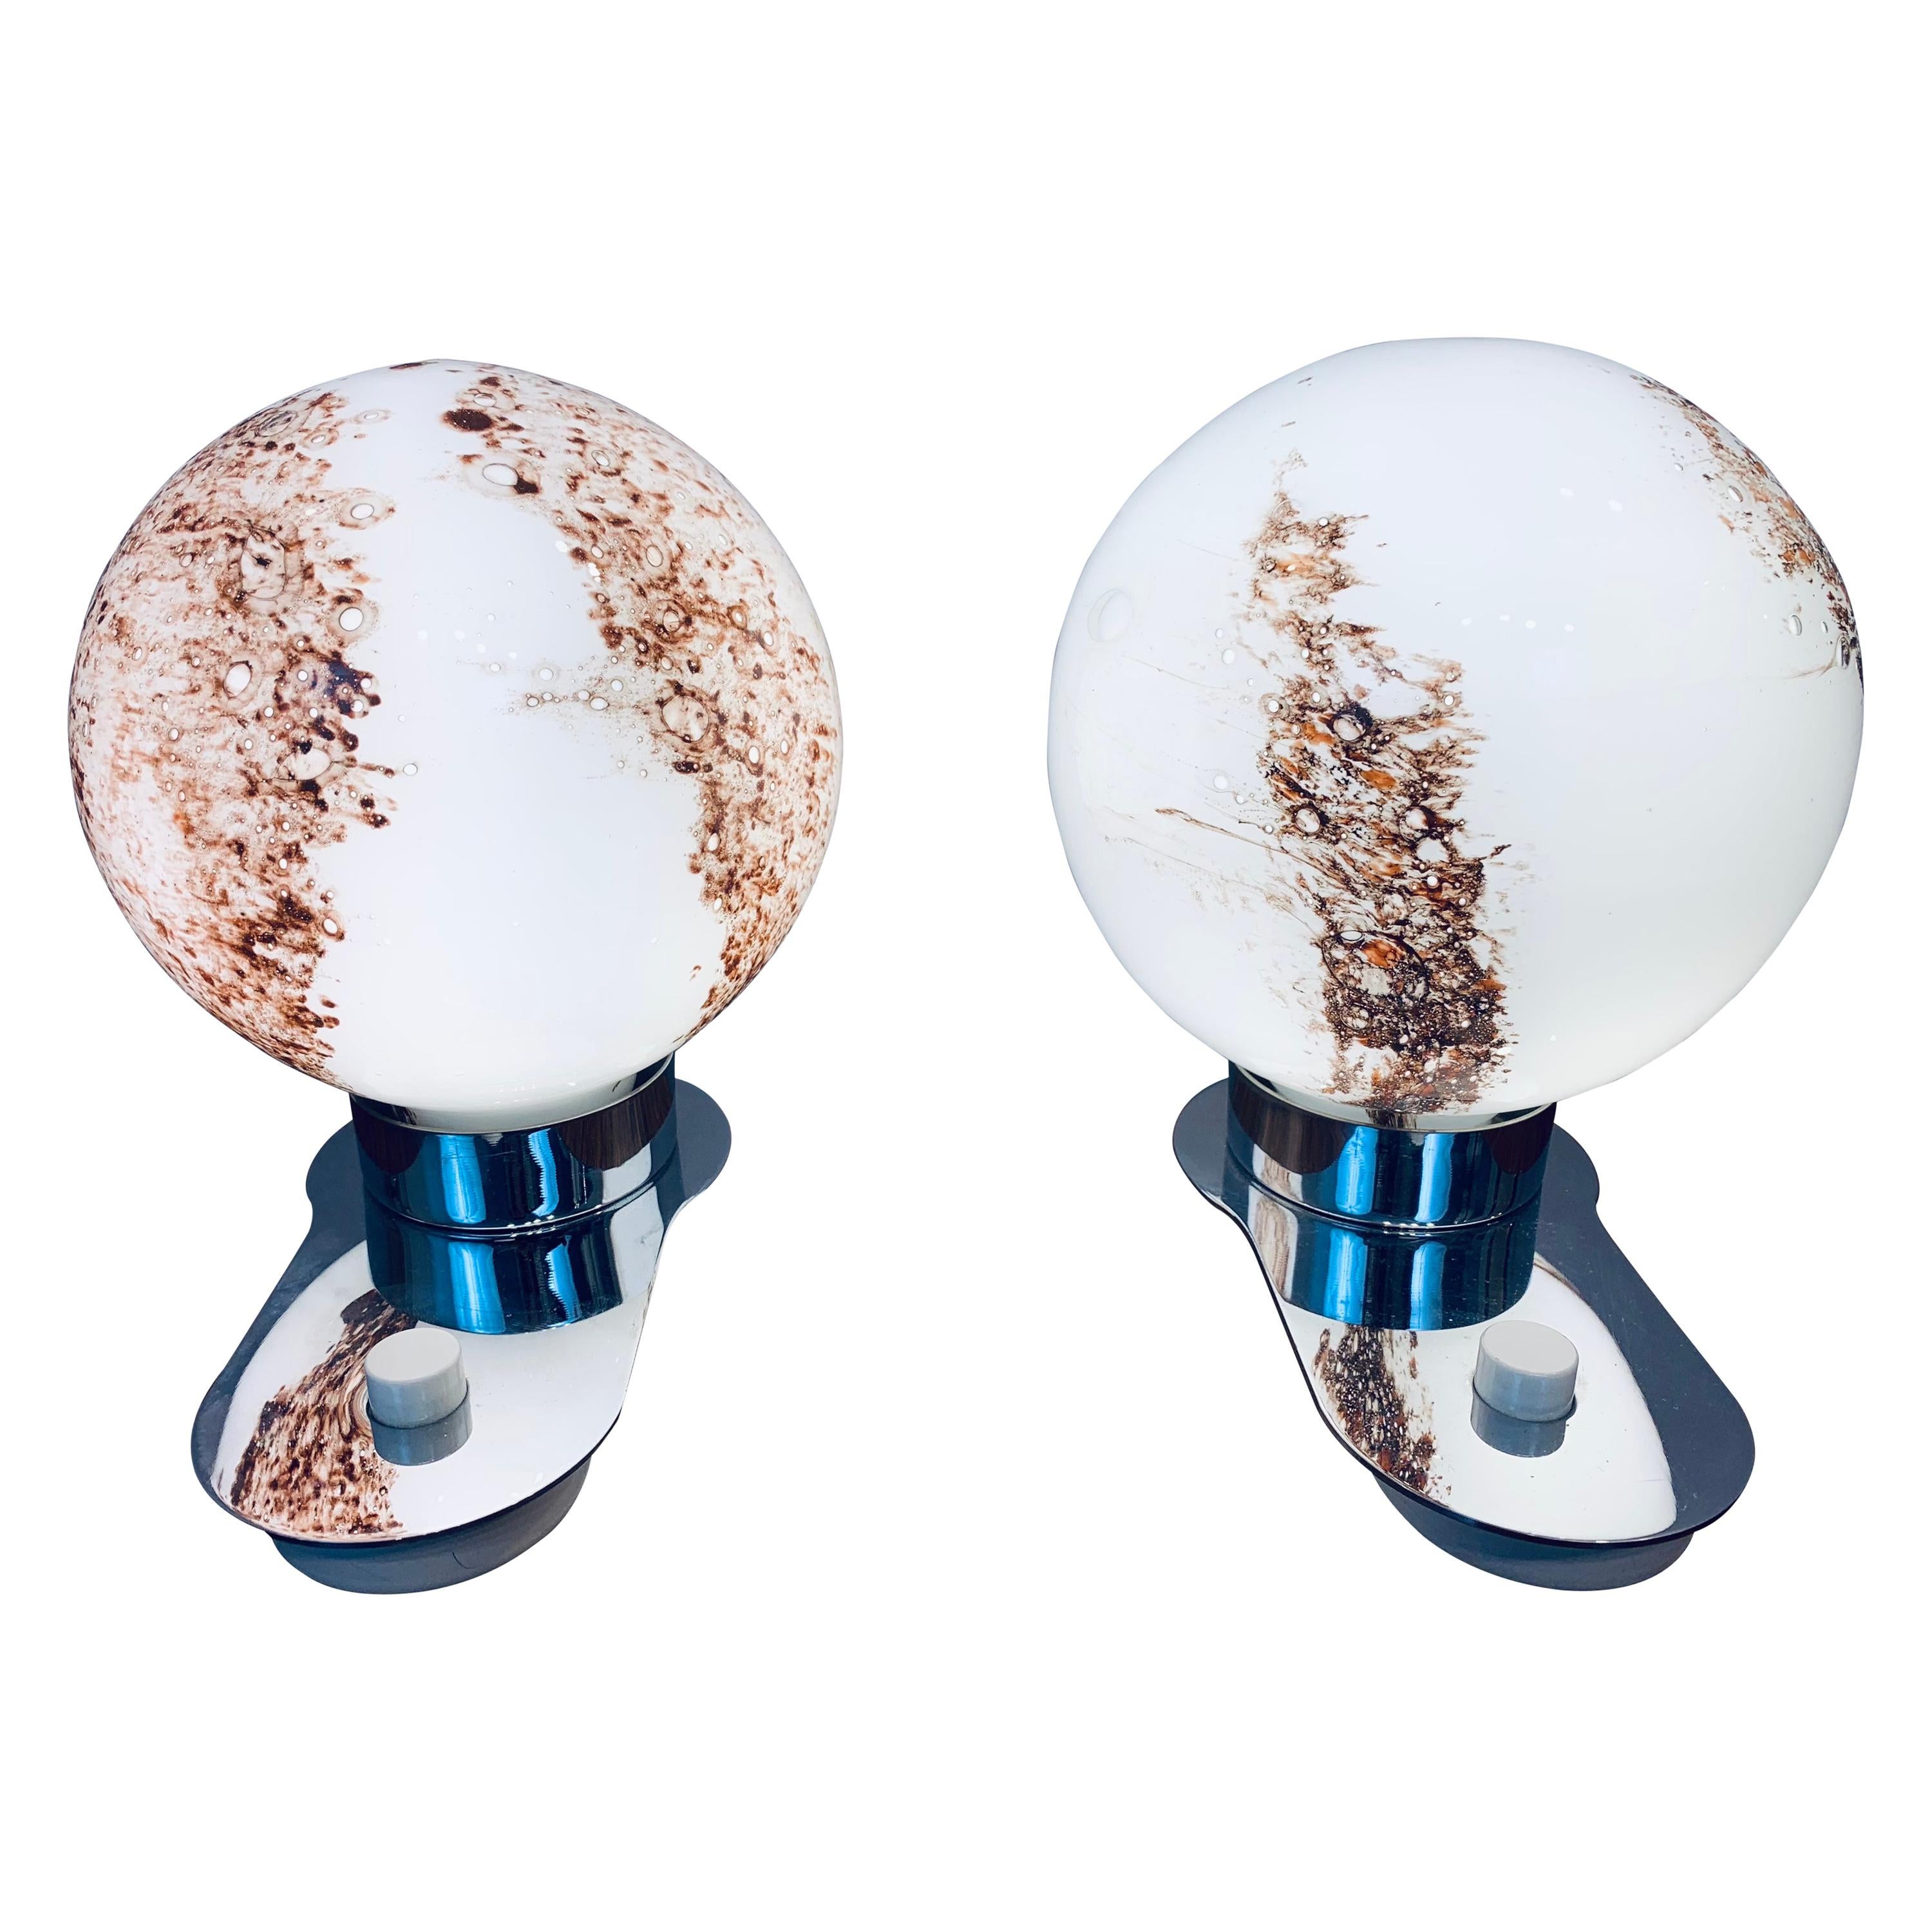 Pair of 1970s Doria Leuchten Glass Brown & White Globe and Chrome Table Lamps